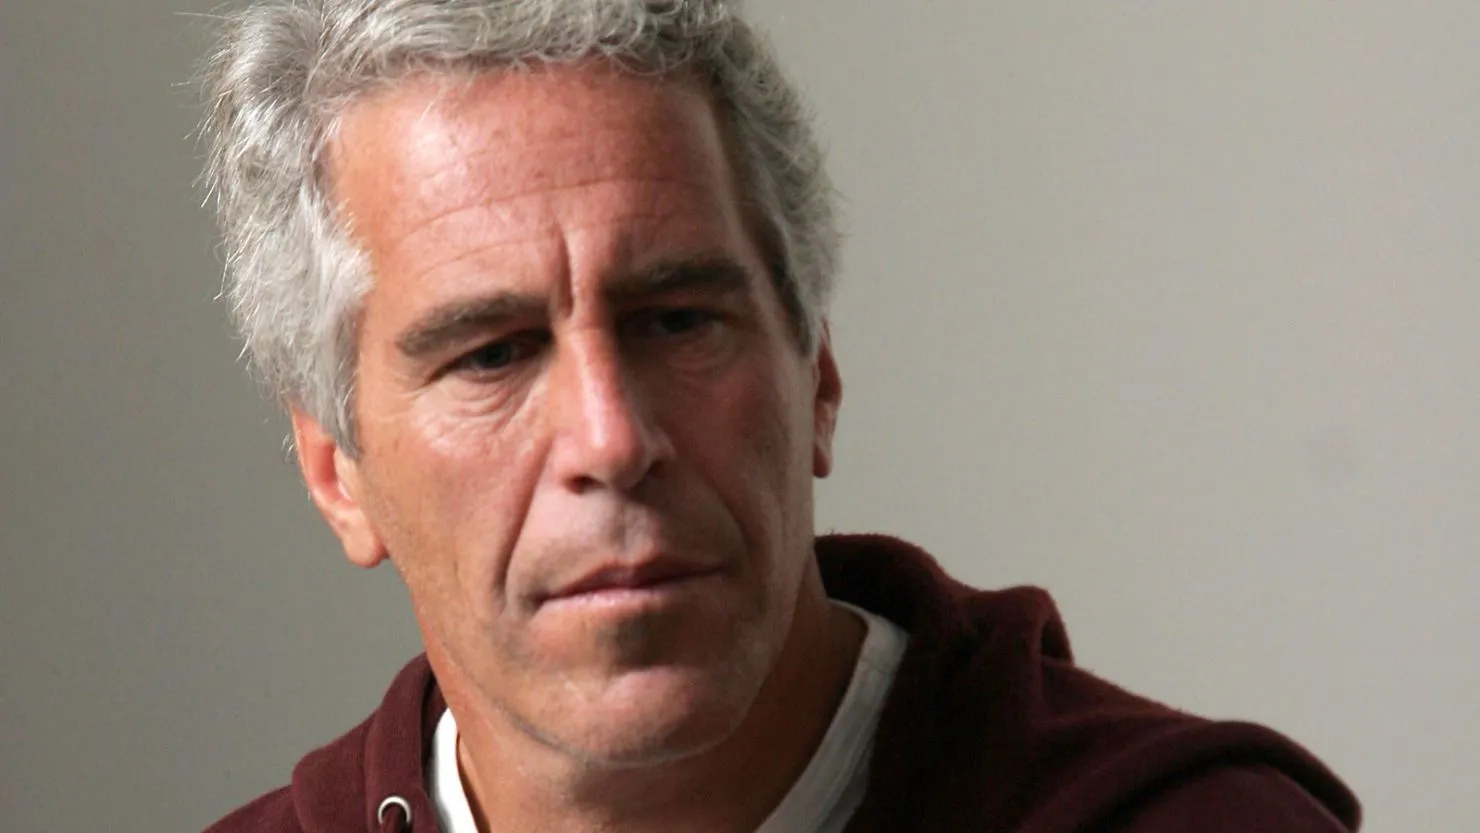 Prosecutors Knew Epstein Had Raped Young Girls 2 Years Before Cutting Plea Deal